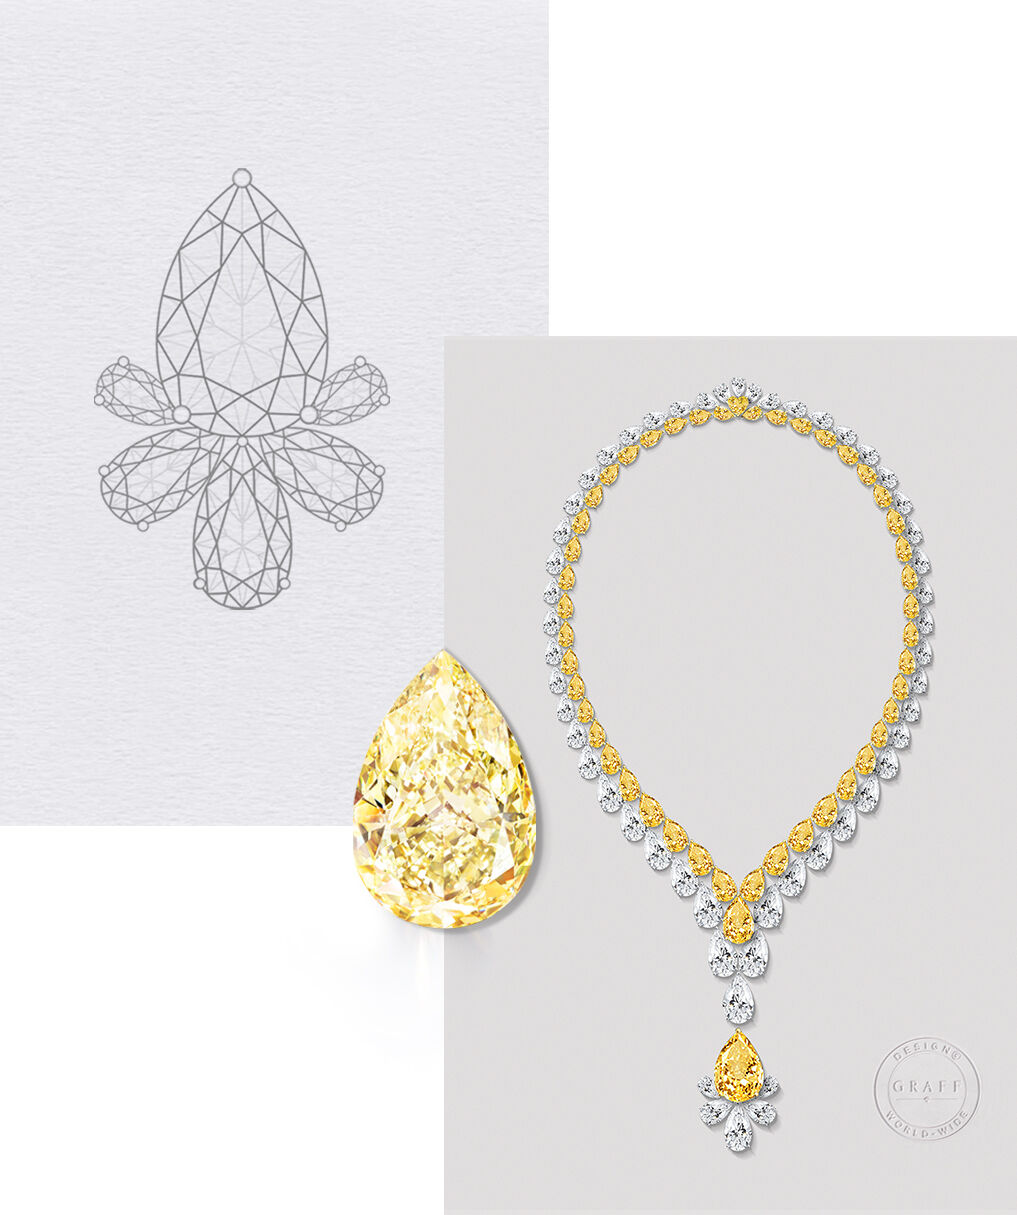 Drawing and painting of Graff yellow and white high jewellery necklace